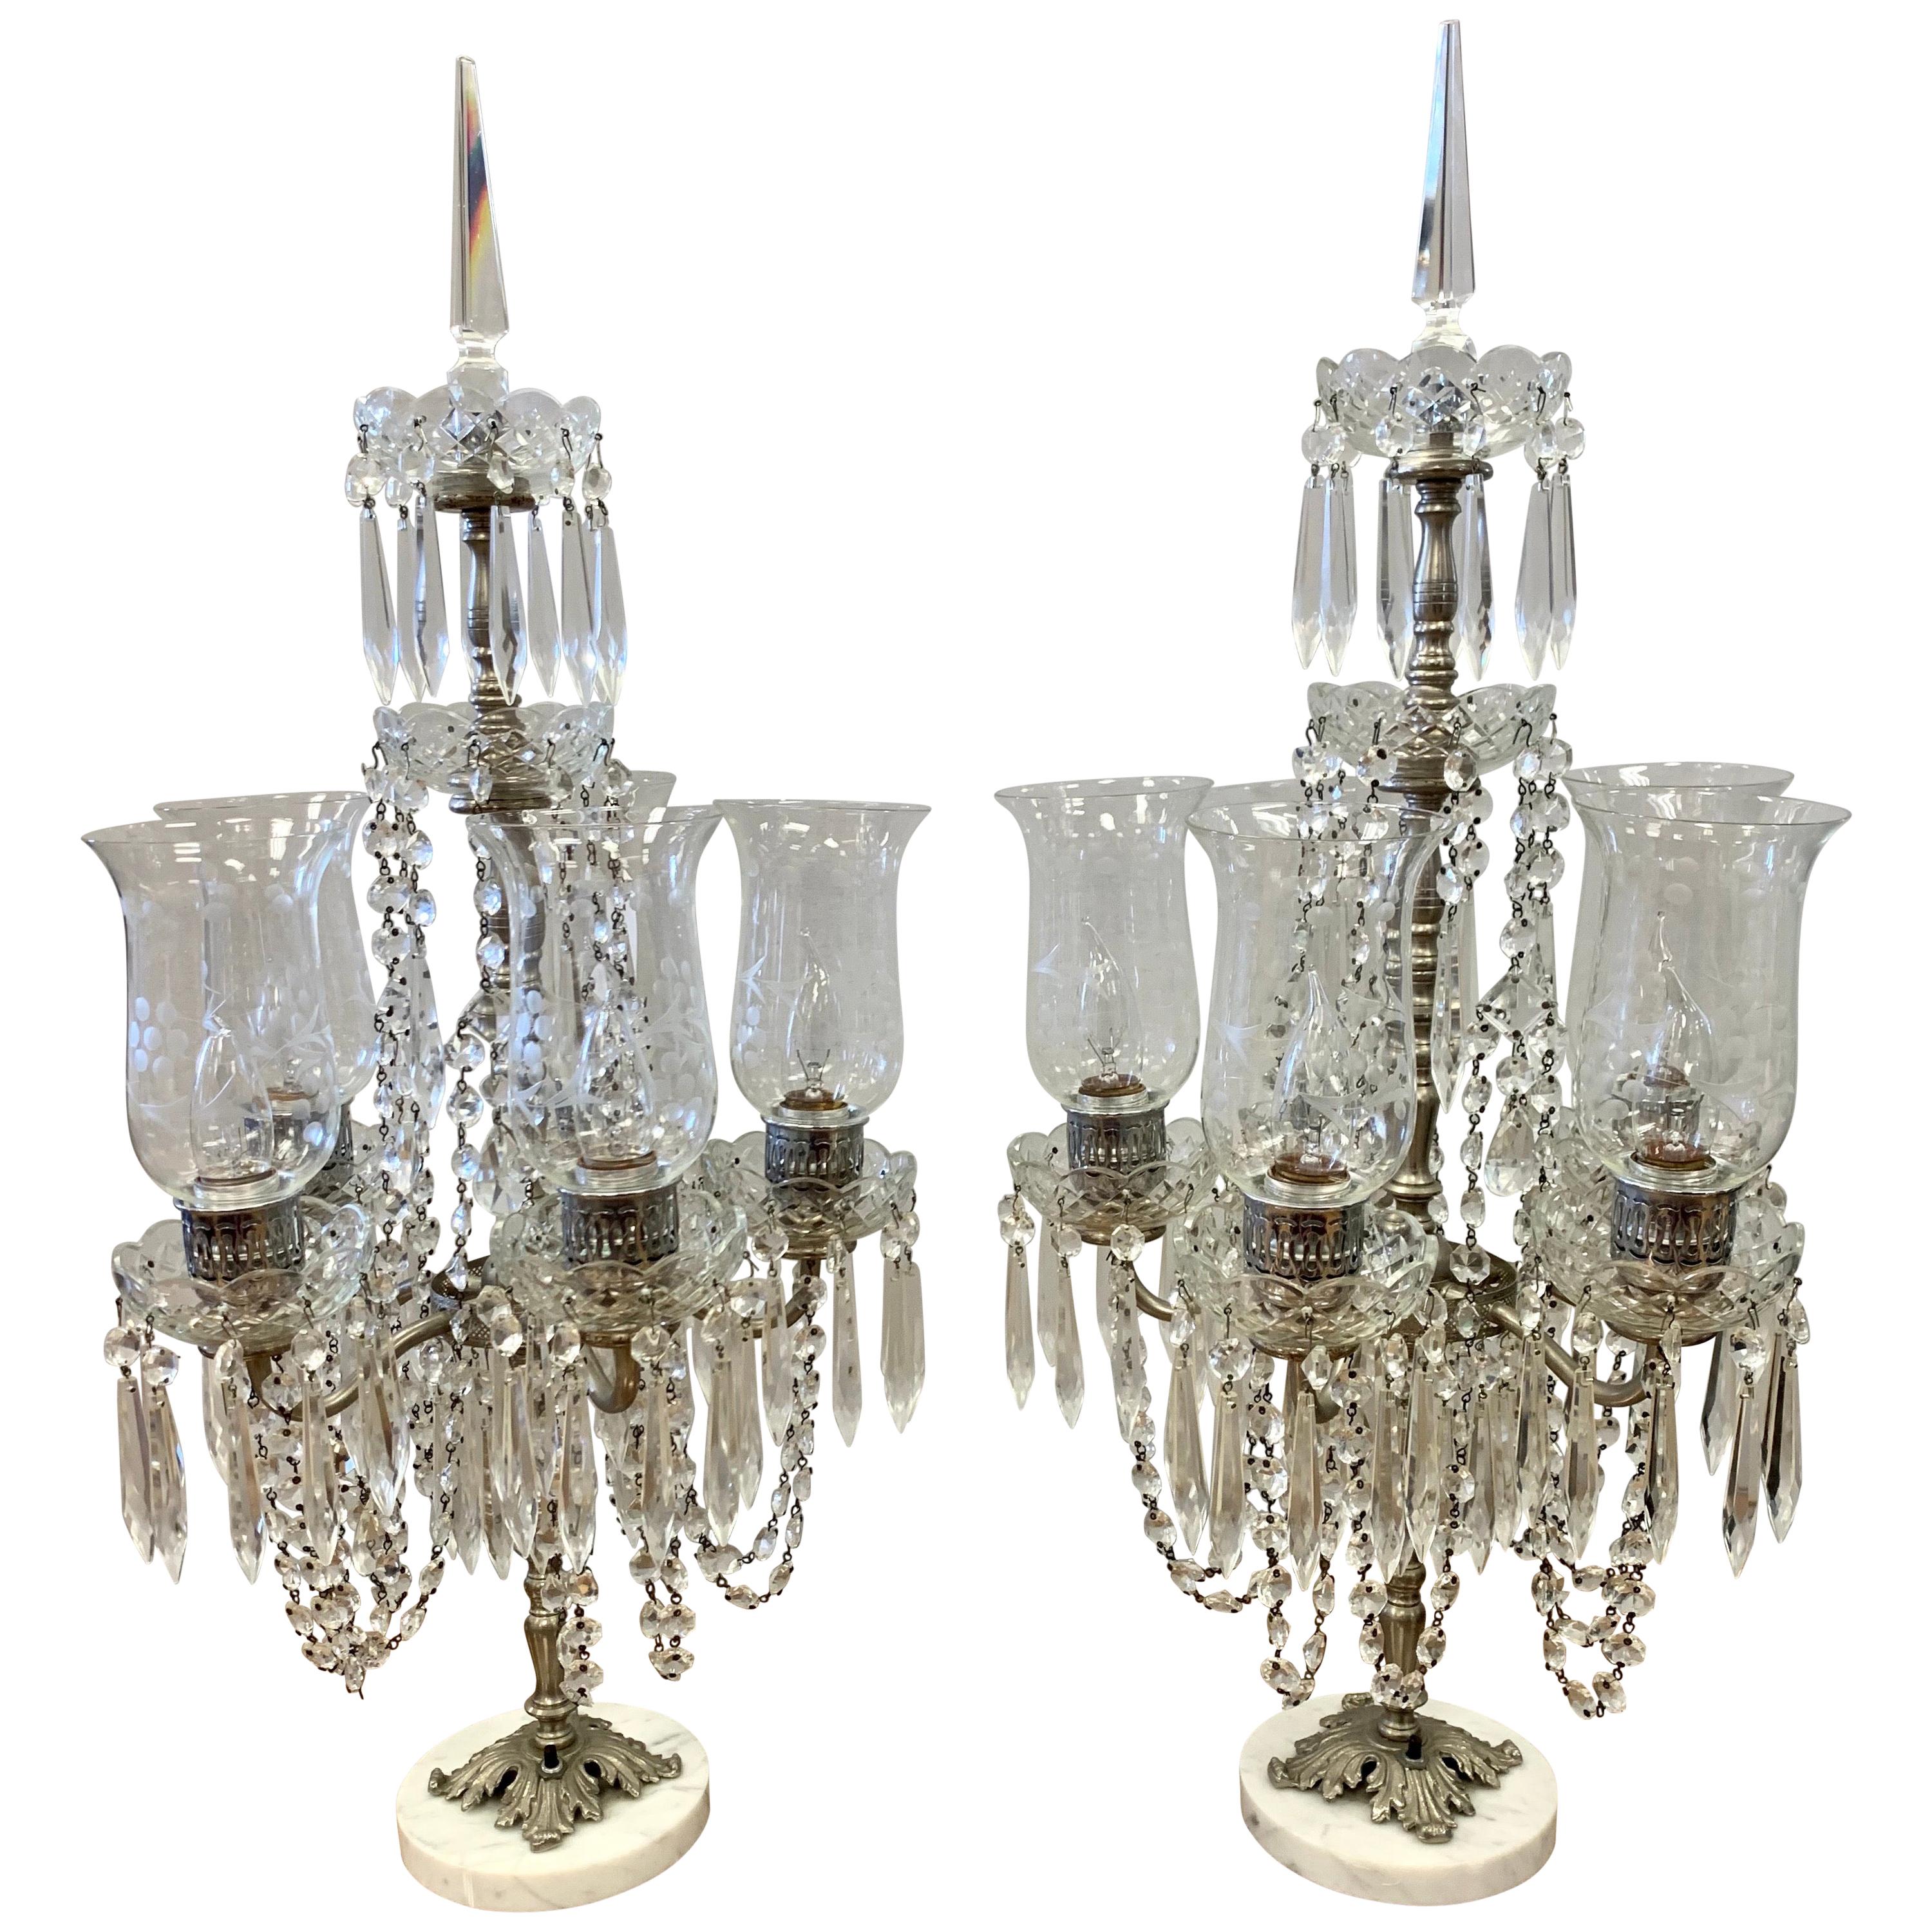 Pair of Exquisite Crystal and Silver Five Arm Candelabras with Marble Base